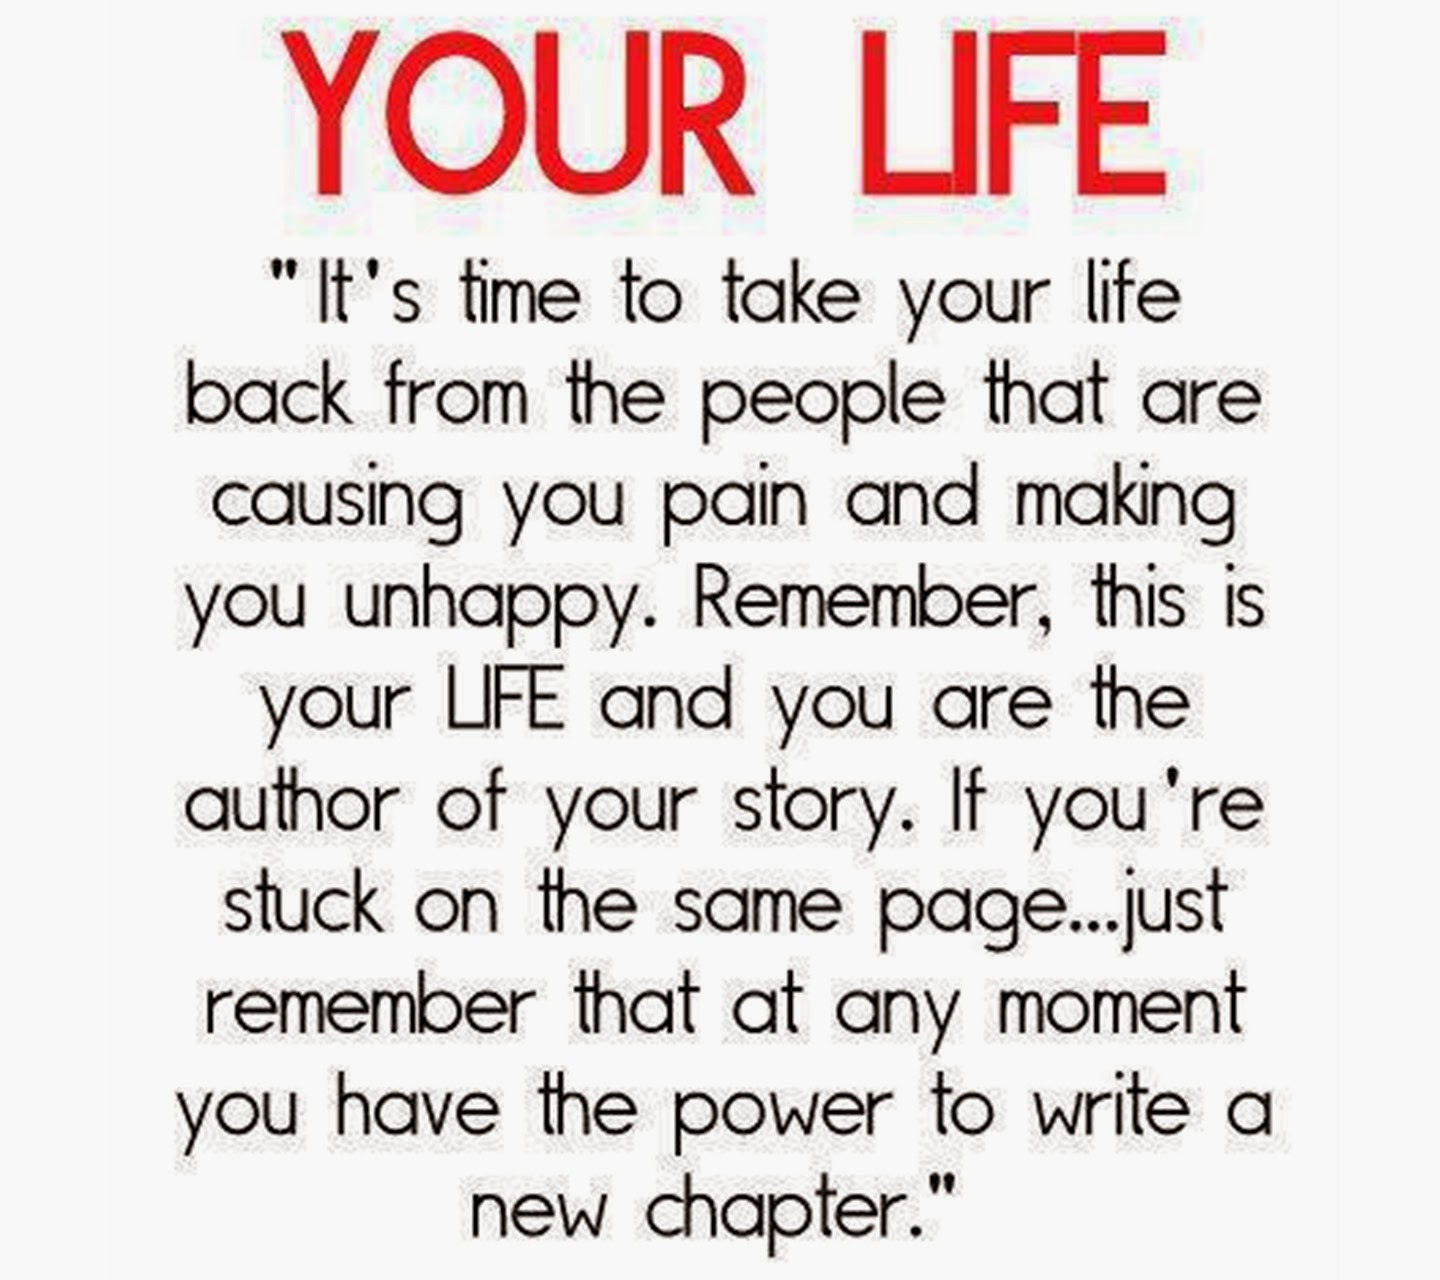 http://best-quotes-and-sayings.blogspot.com/2013/12/your-life.html